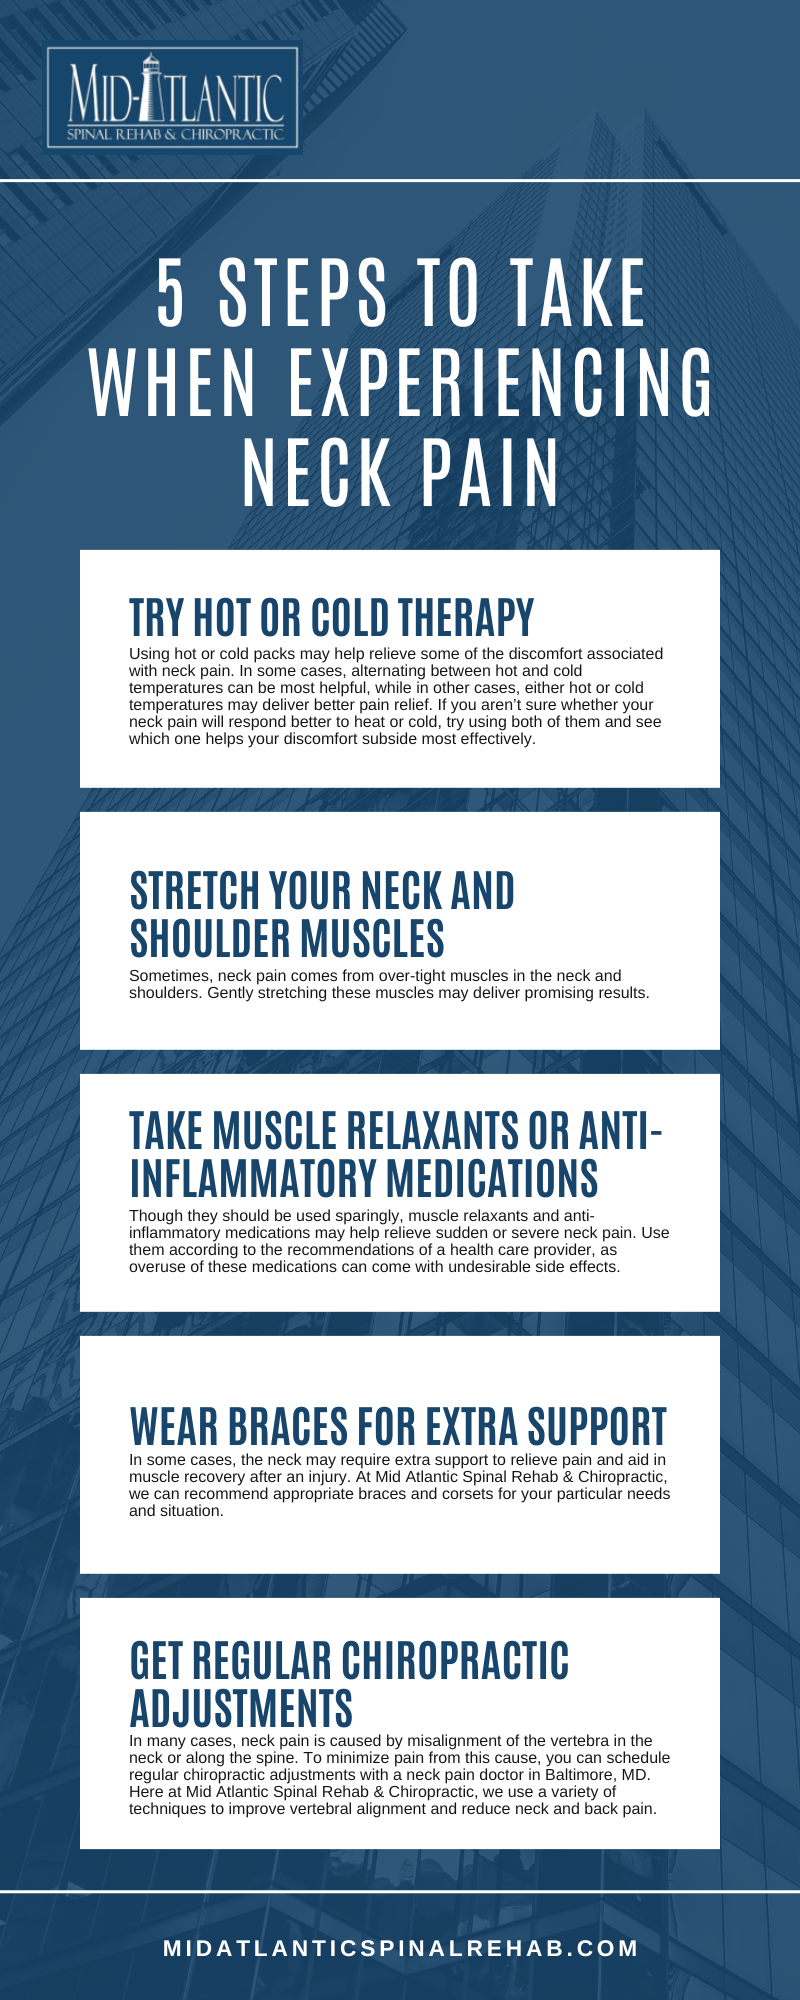 5 Steps To Take When Experiencing Neck Pain Infographic